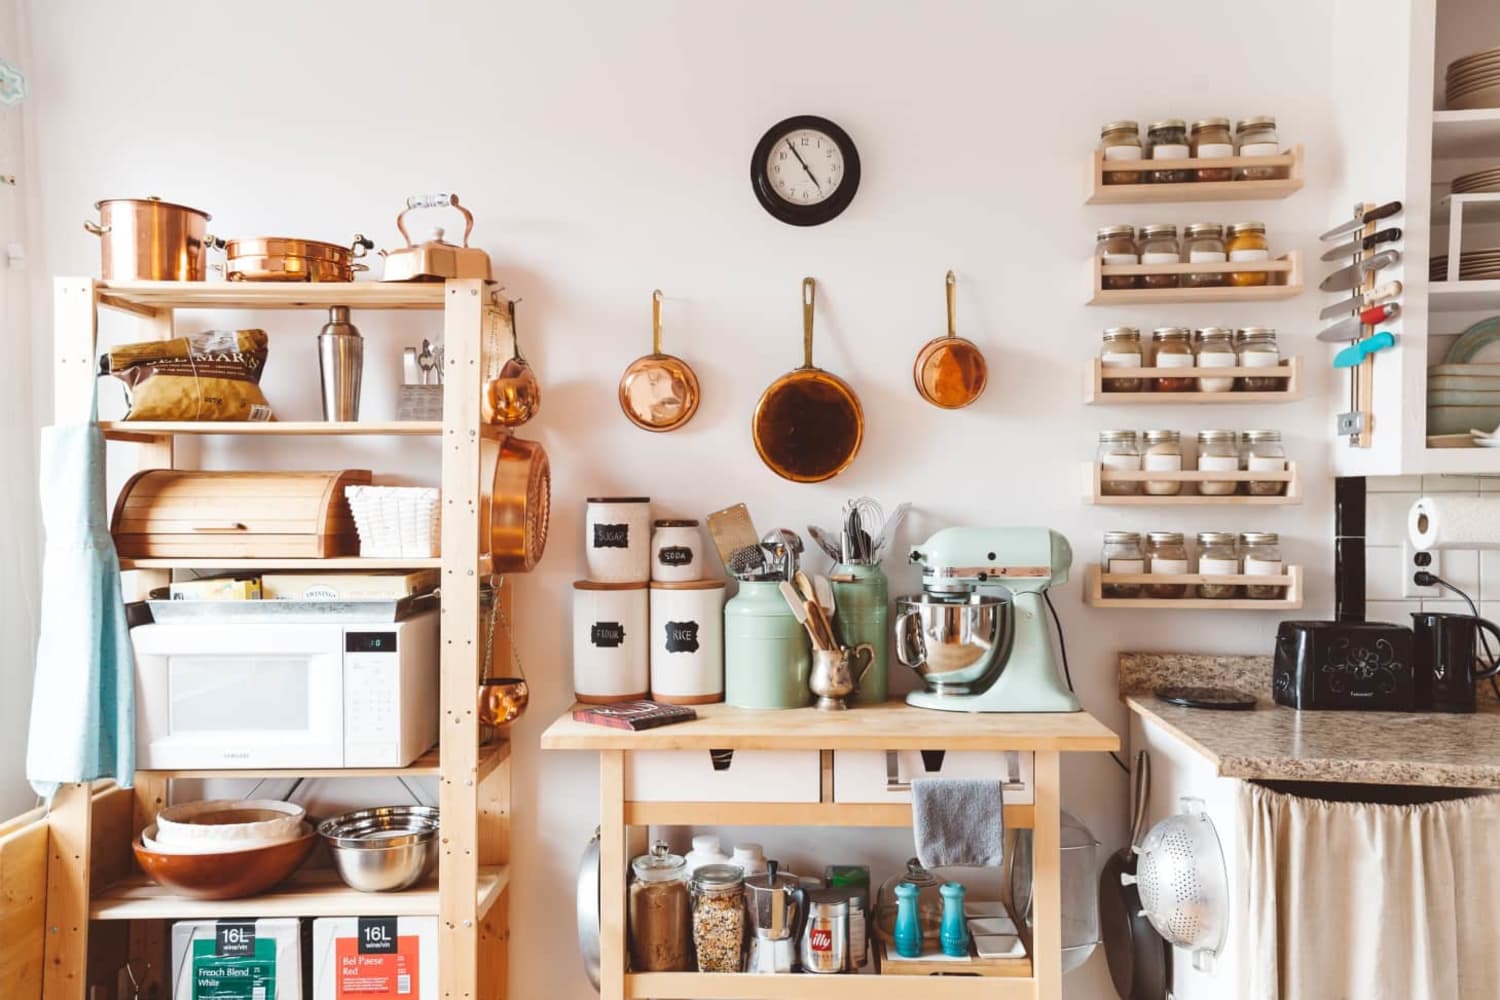 Anthropologie Sale Has Kitchen Items for 50 Percent Off